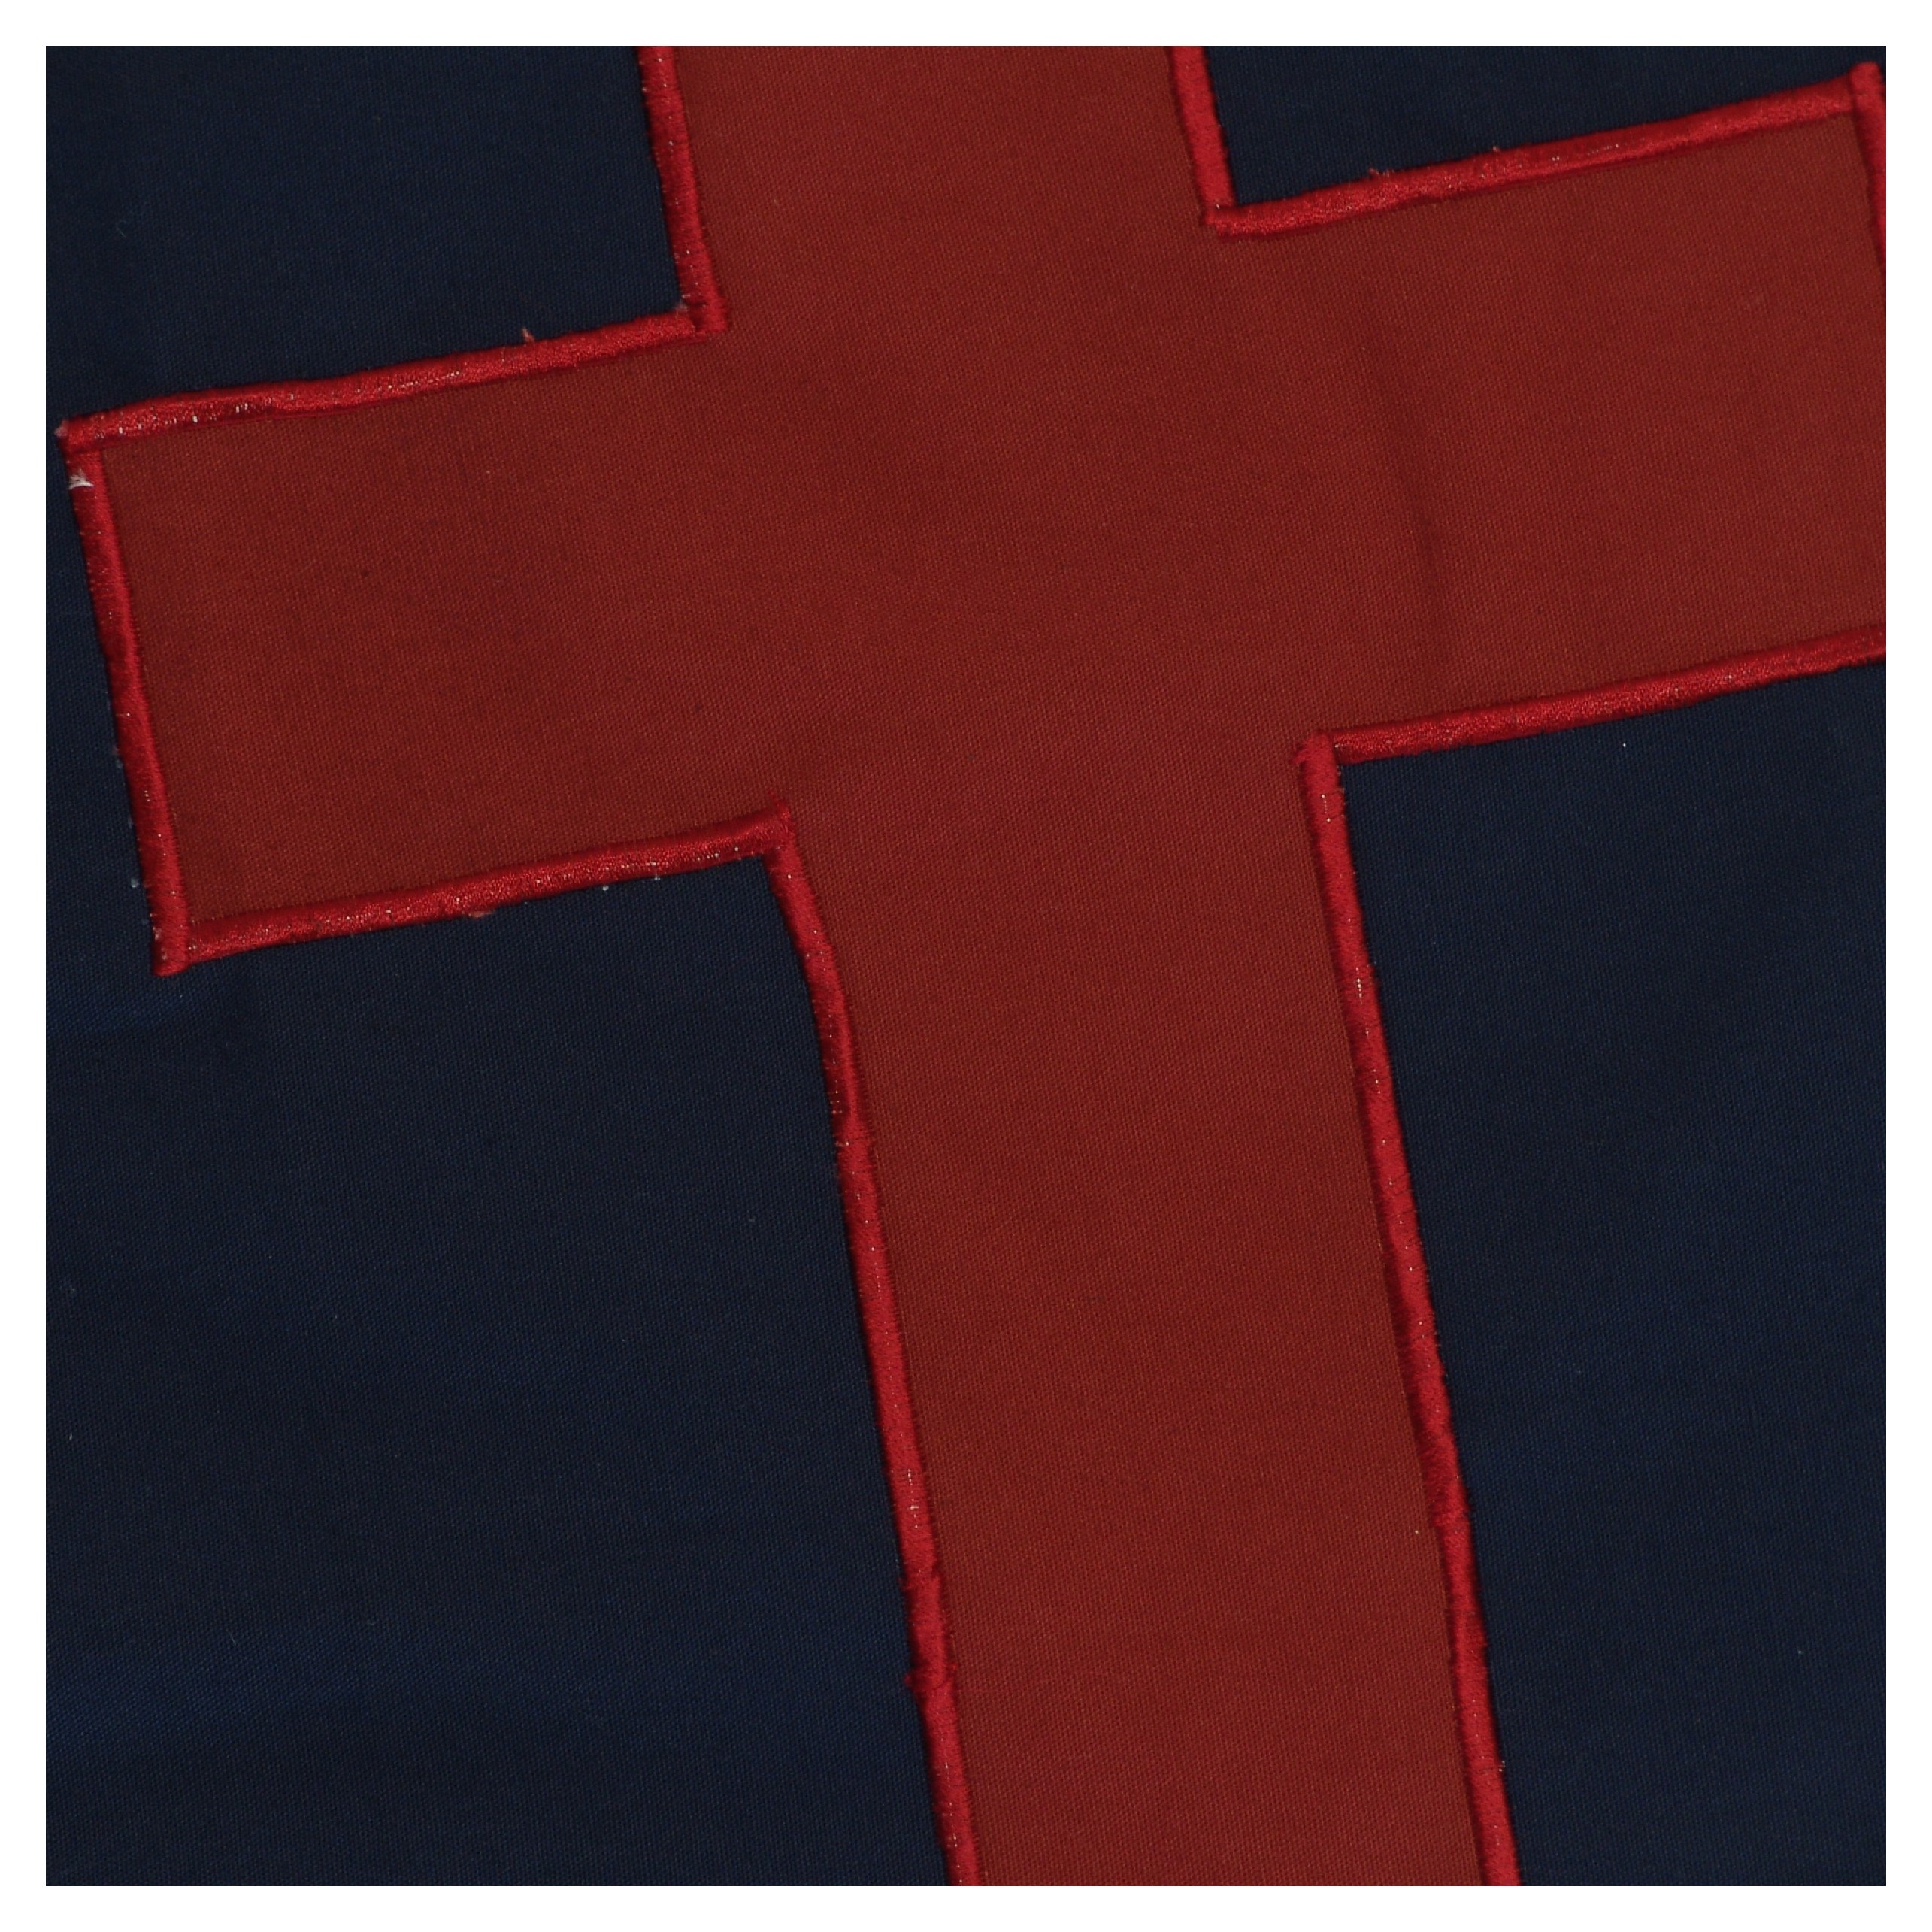 free clip art of the christian flag - photo #32